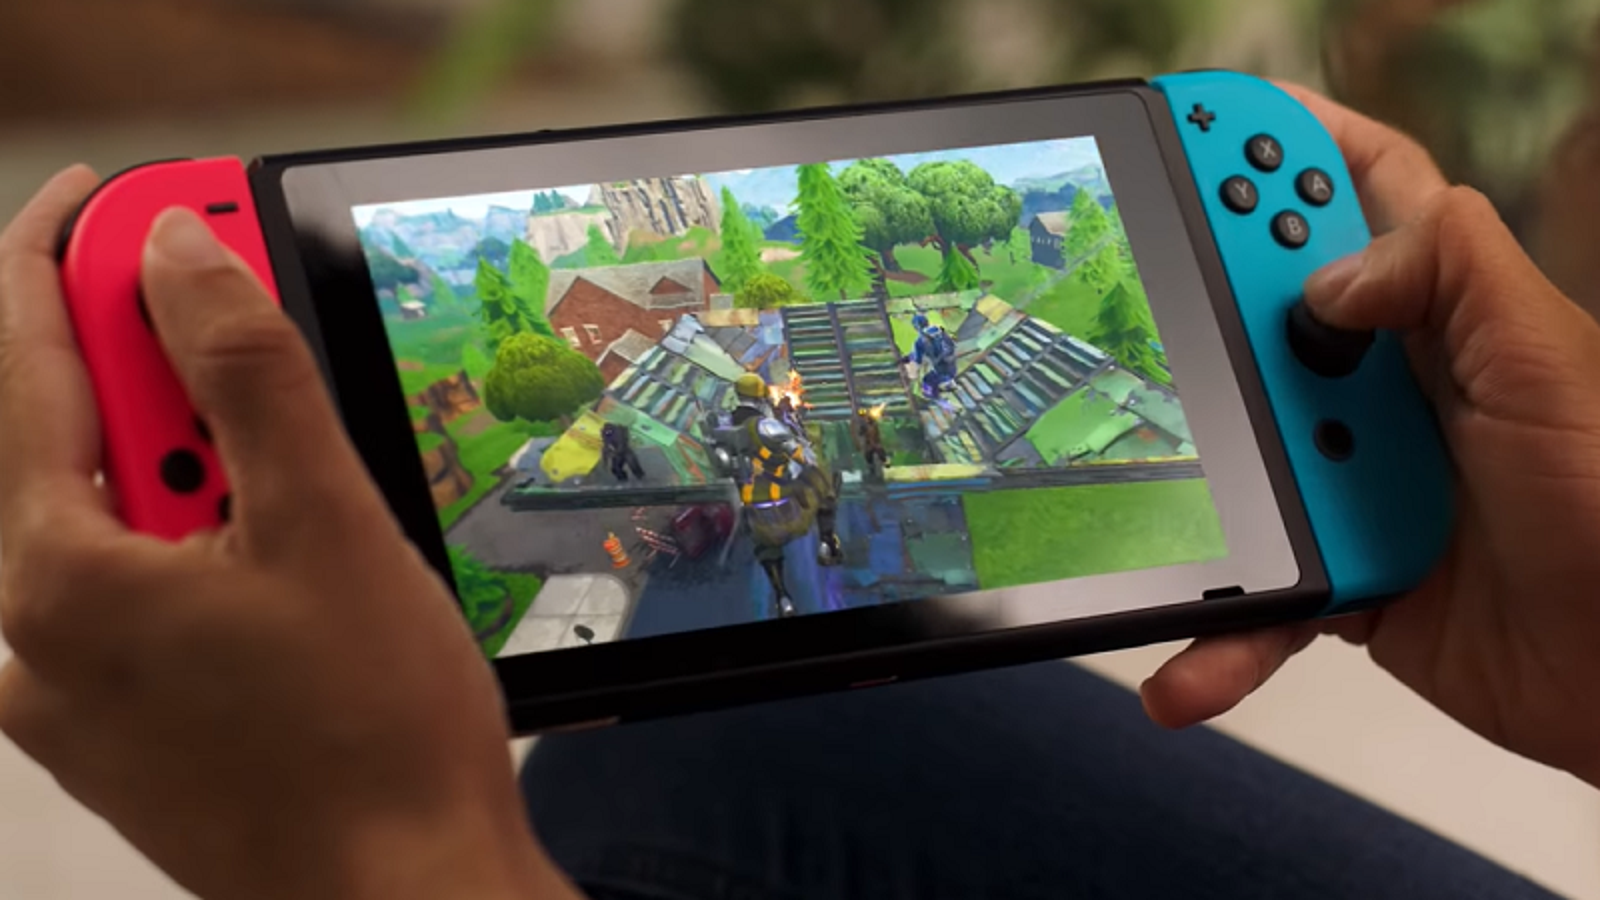 The Voice Chat Software In Fortnite Switch Is Now Available For All ...